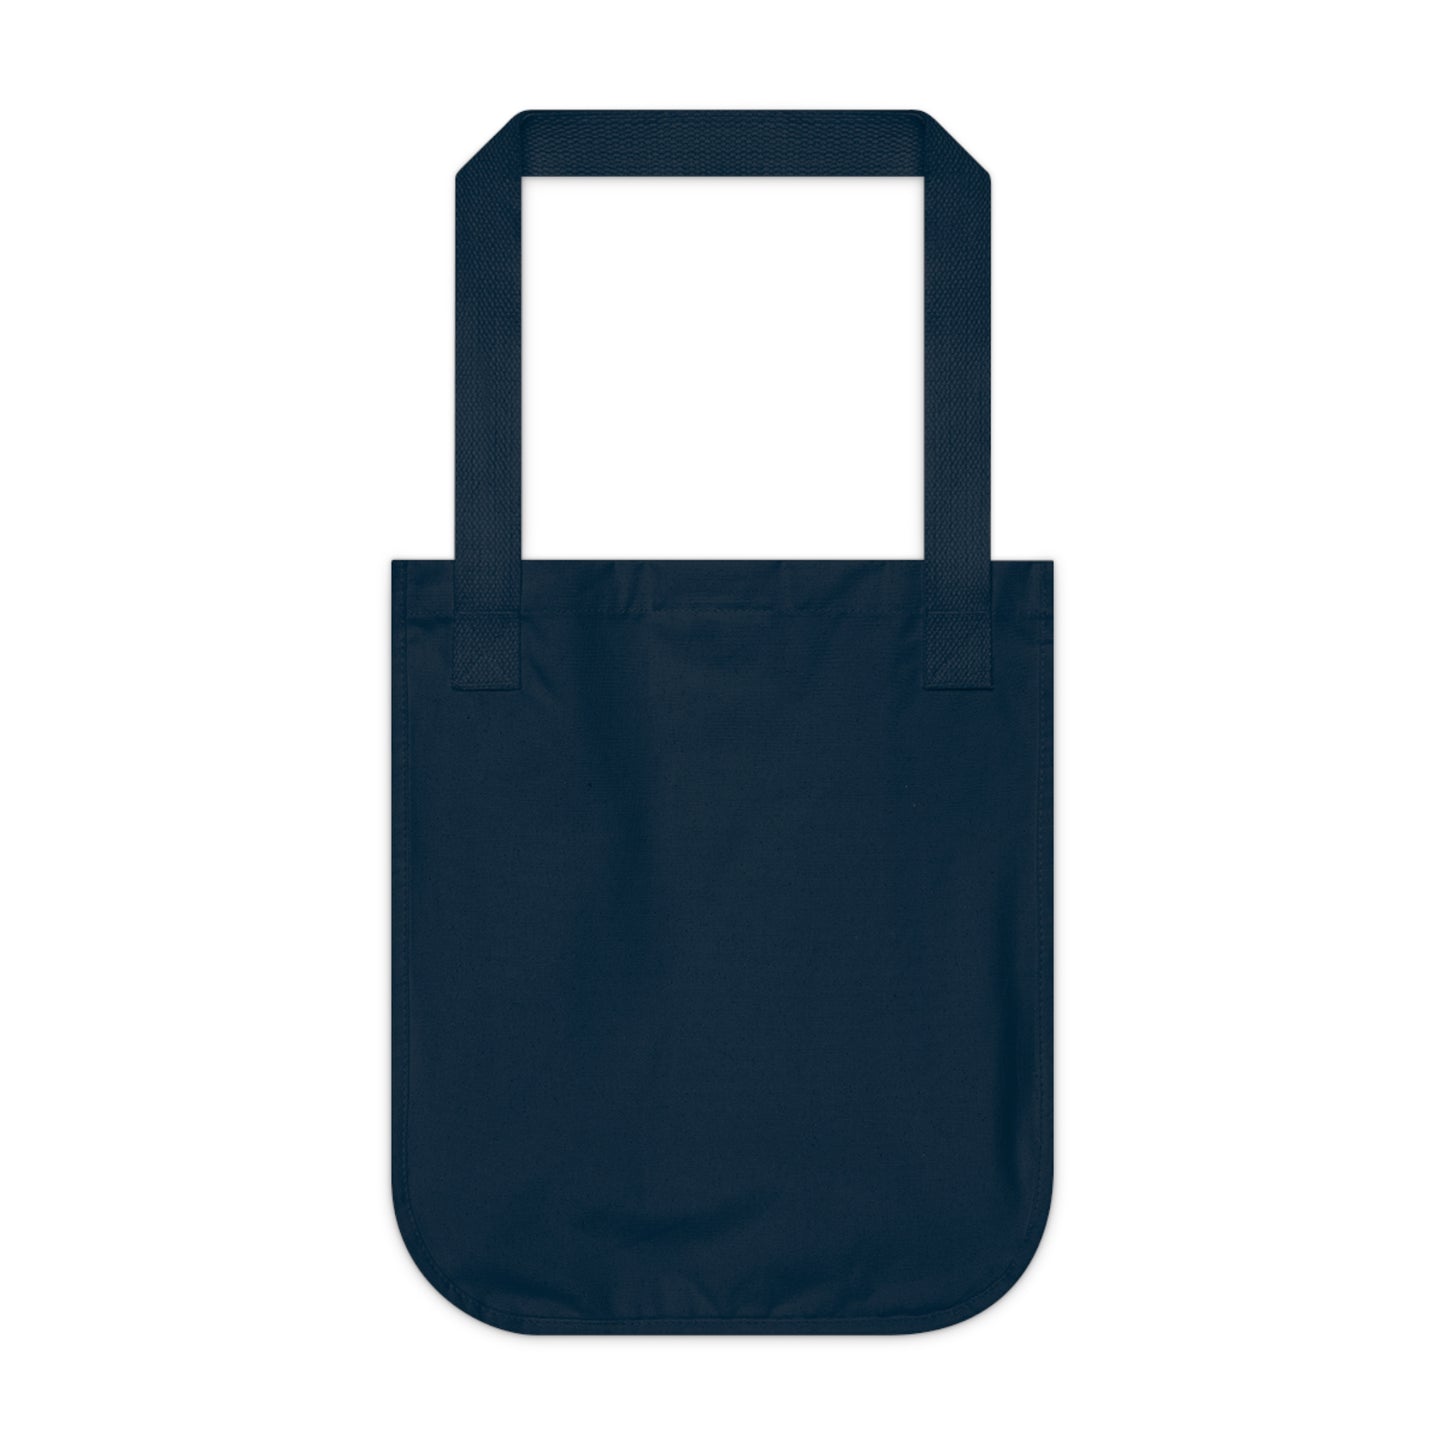 "Illustrated Intersections: A Mixed Media Exploration" - Bam Boo! Lifestyle Eco-friendly Tote Bag